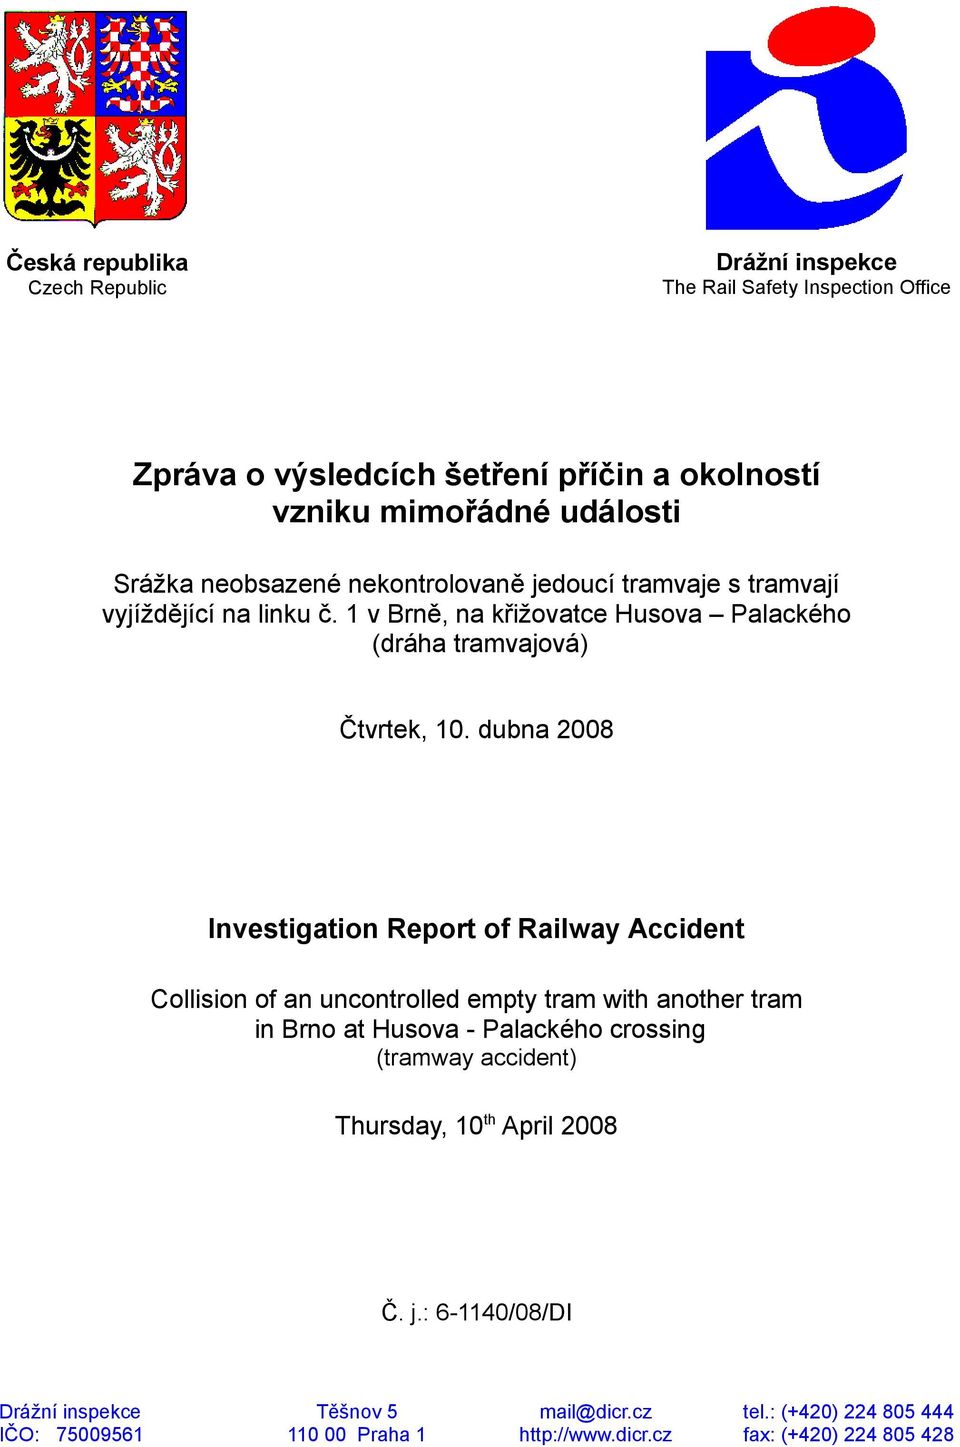 dubna 2008 Investigation Report of Railway Accident Collision of an uncontrolled empty tram with another tram in Brno at Husova - Palackého crossing (tramway